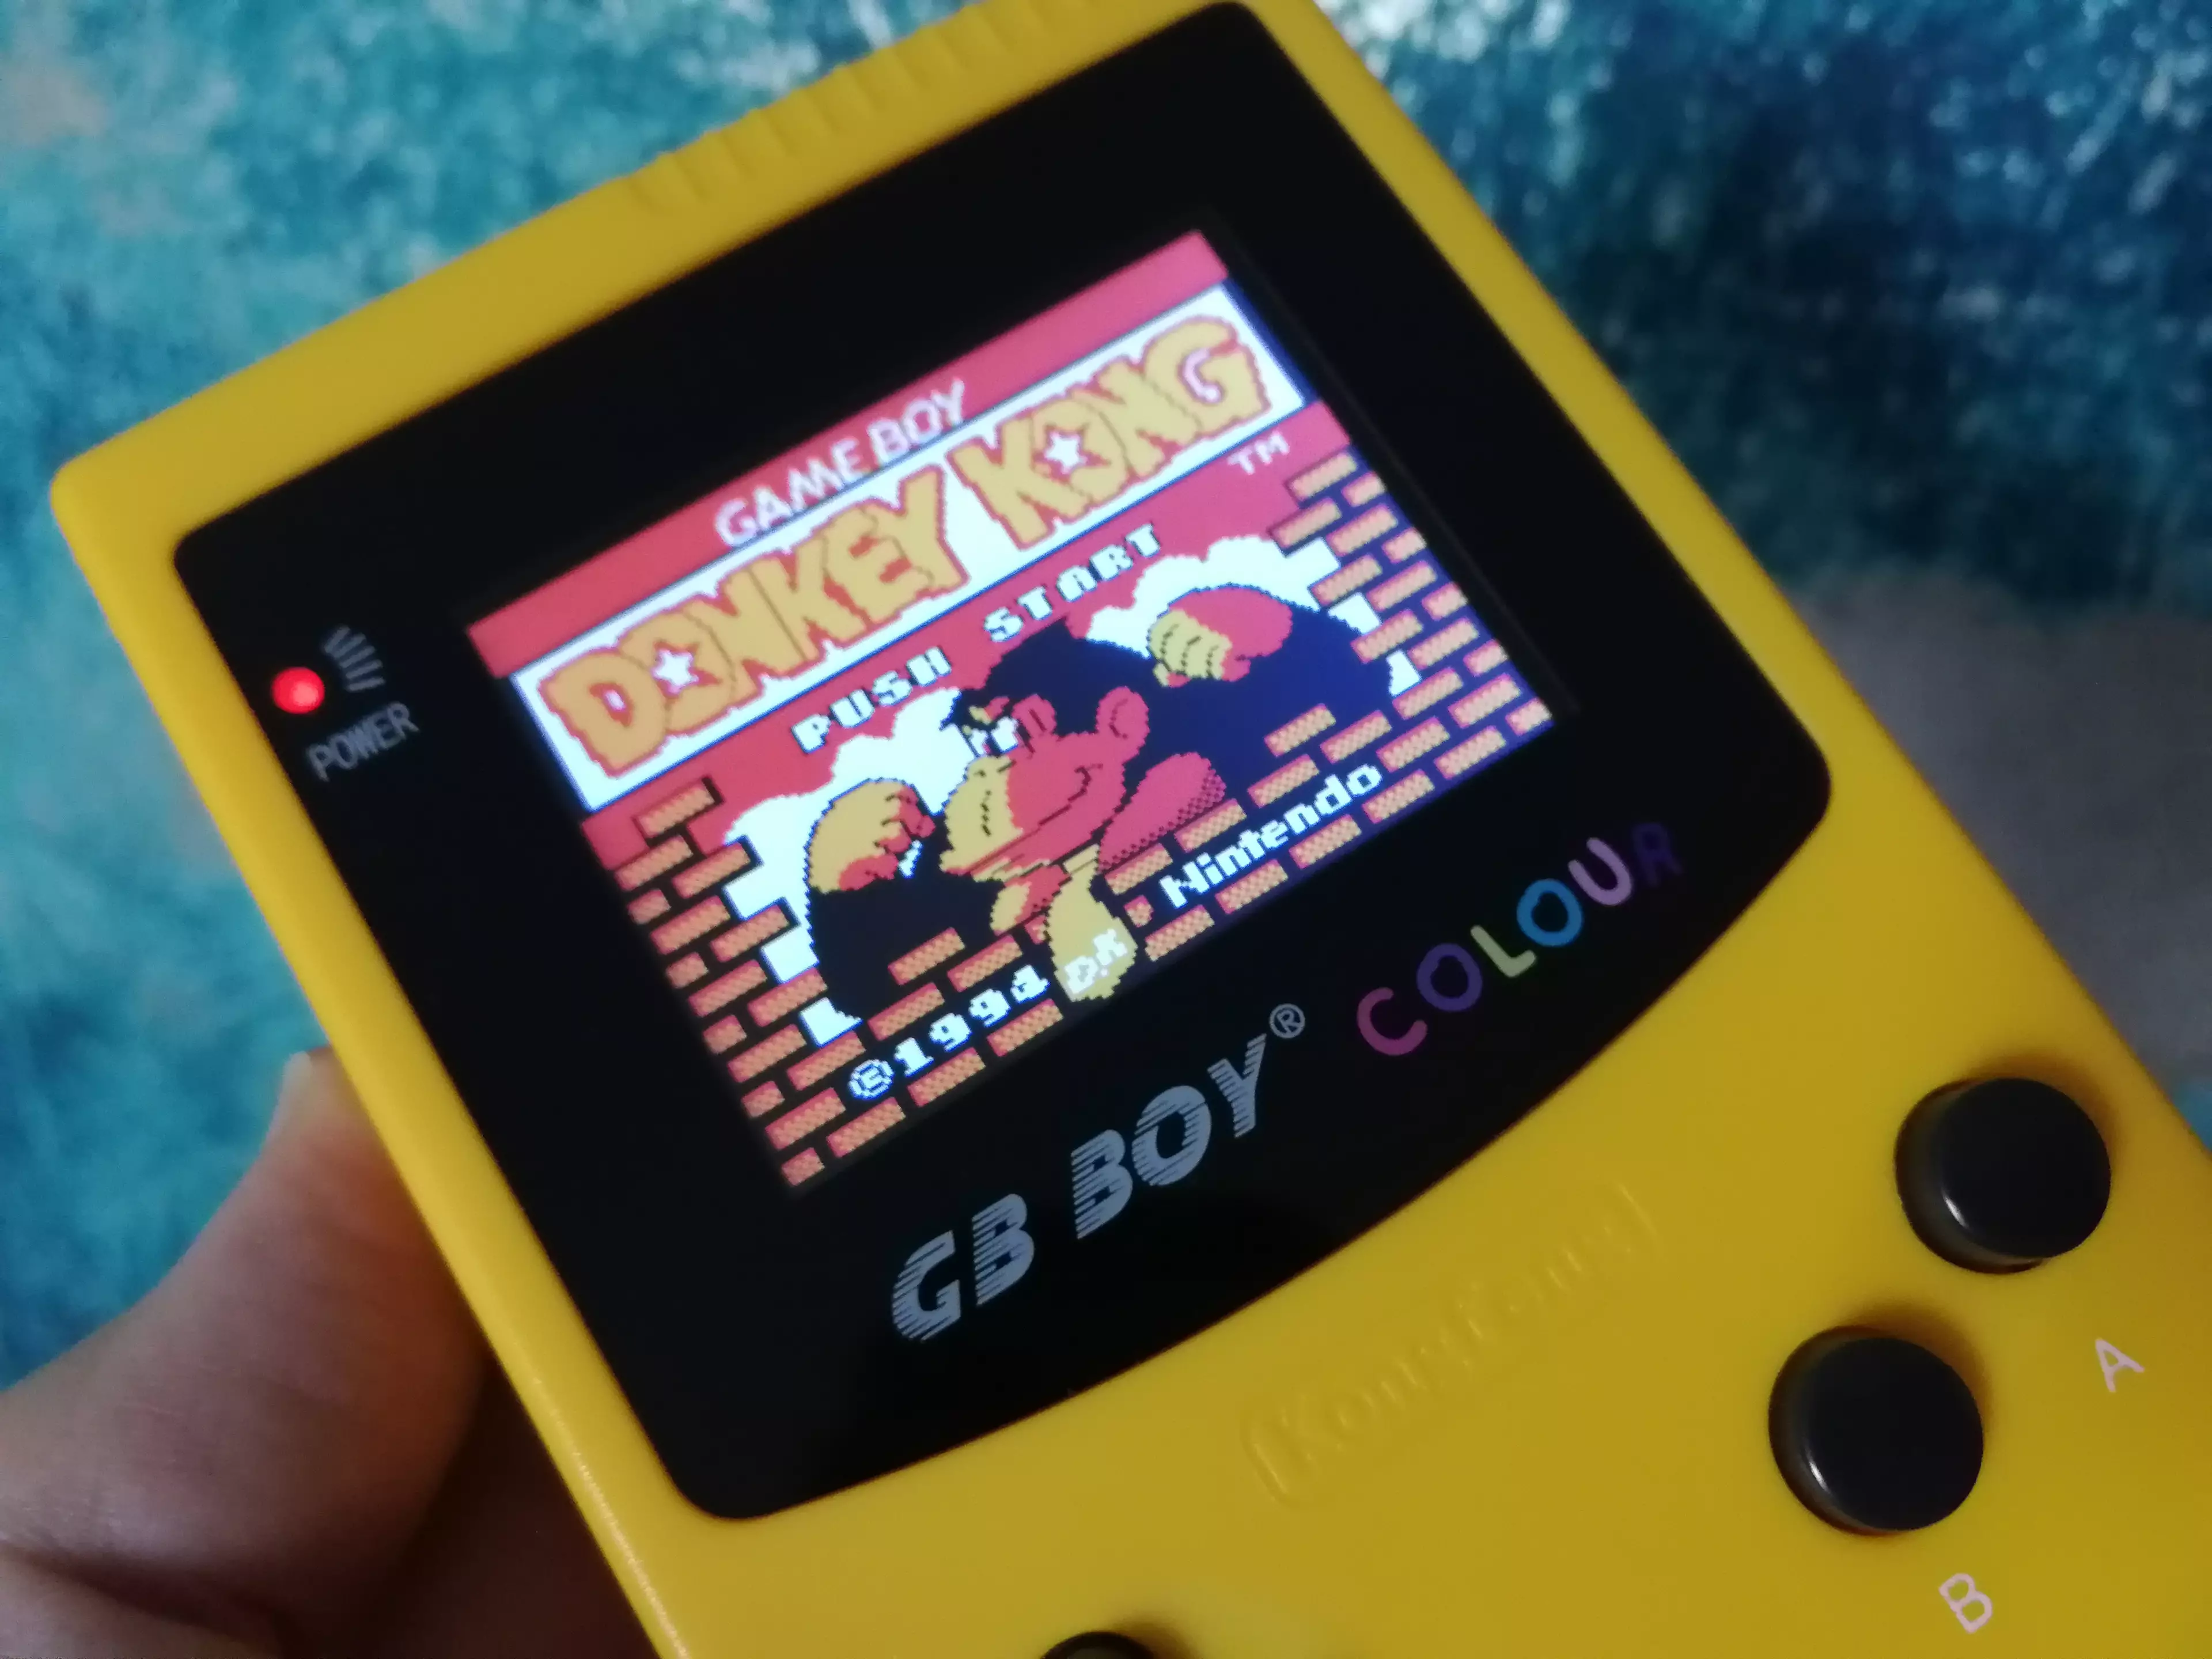 The amazing 1994 version of Donkey Kong is pre-installed /